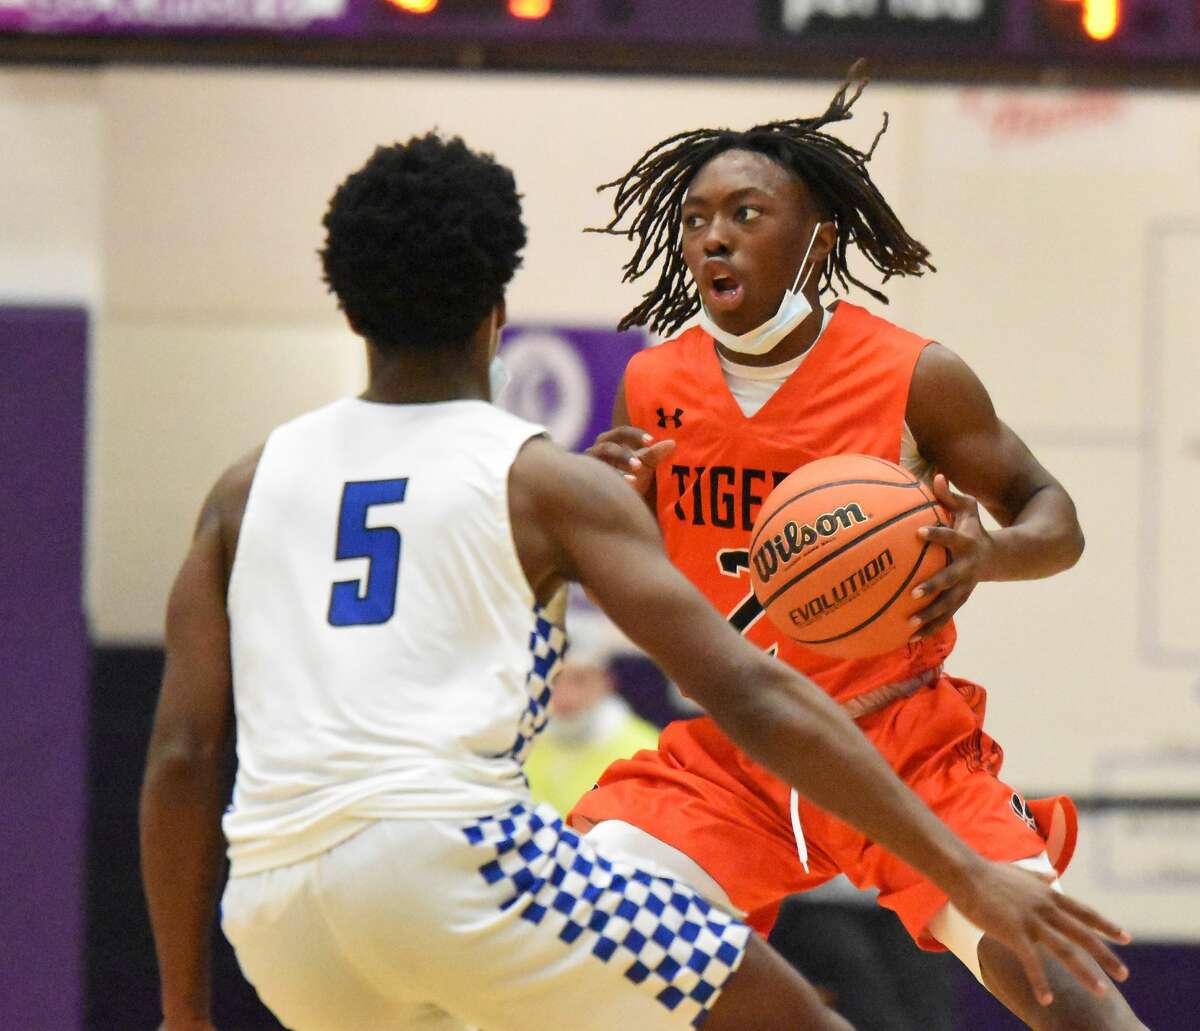 Edwardsville's Malik Allen races the ball up the court during the fourth quarter against Decatur MacArthur in Collinsville.